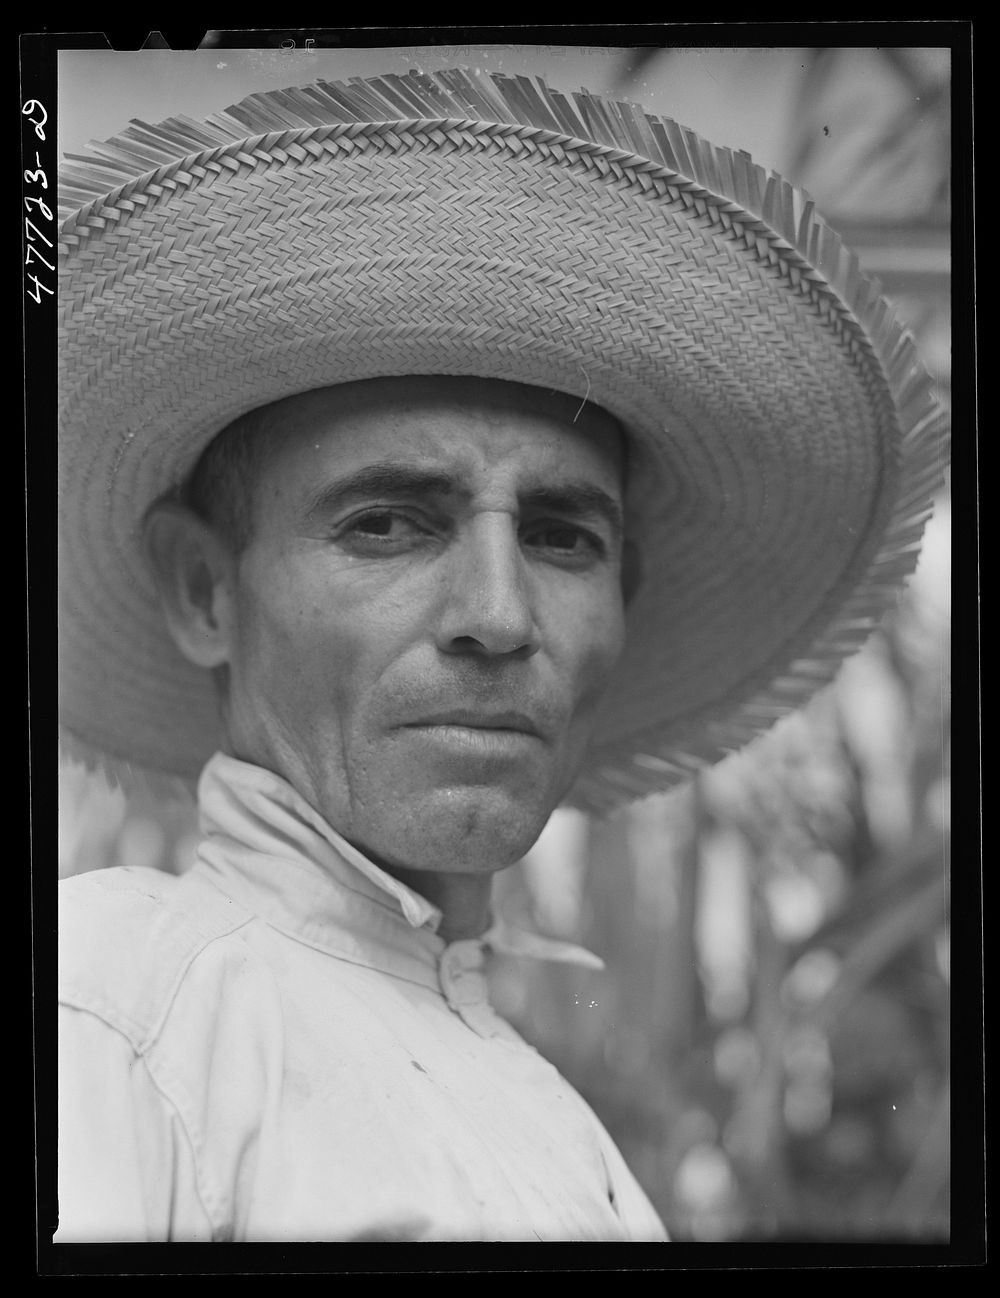 Yauco, Puerto Rico (vicinity). Farm laborer who was cutting cane in a sugar field. Sourced from the Library of Congress.